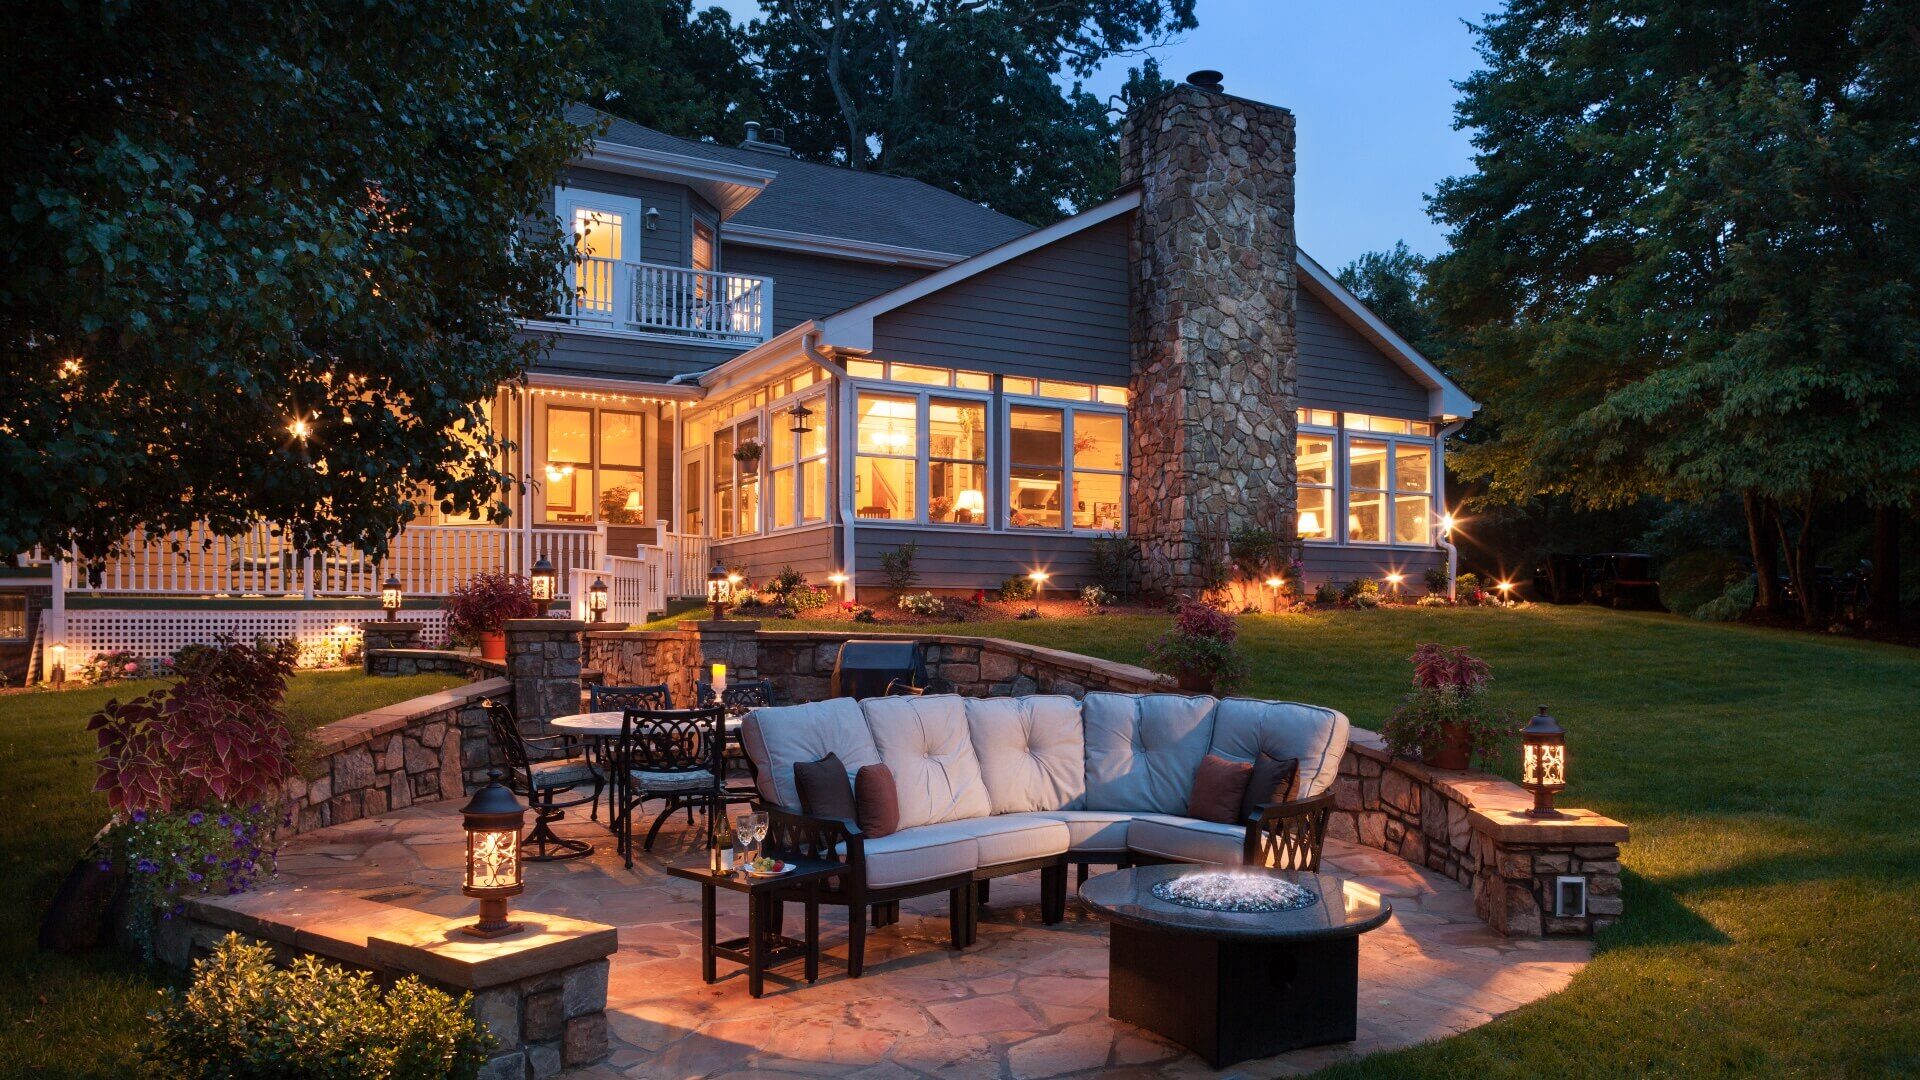 Backyard area of a large home lit up at night with stone patio with table and chairs and couch facing a fire pit